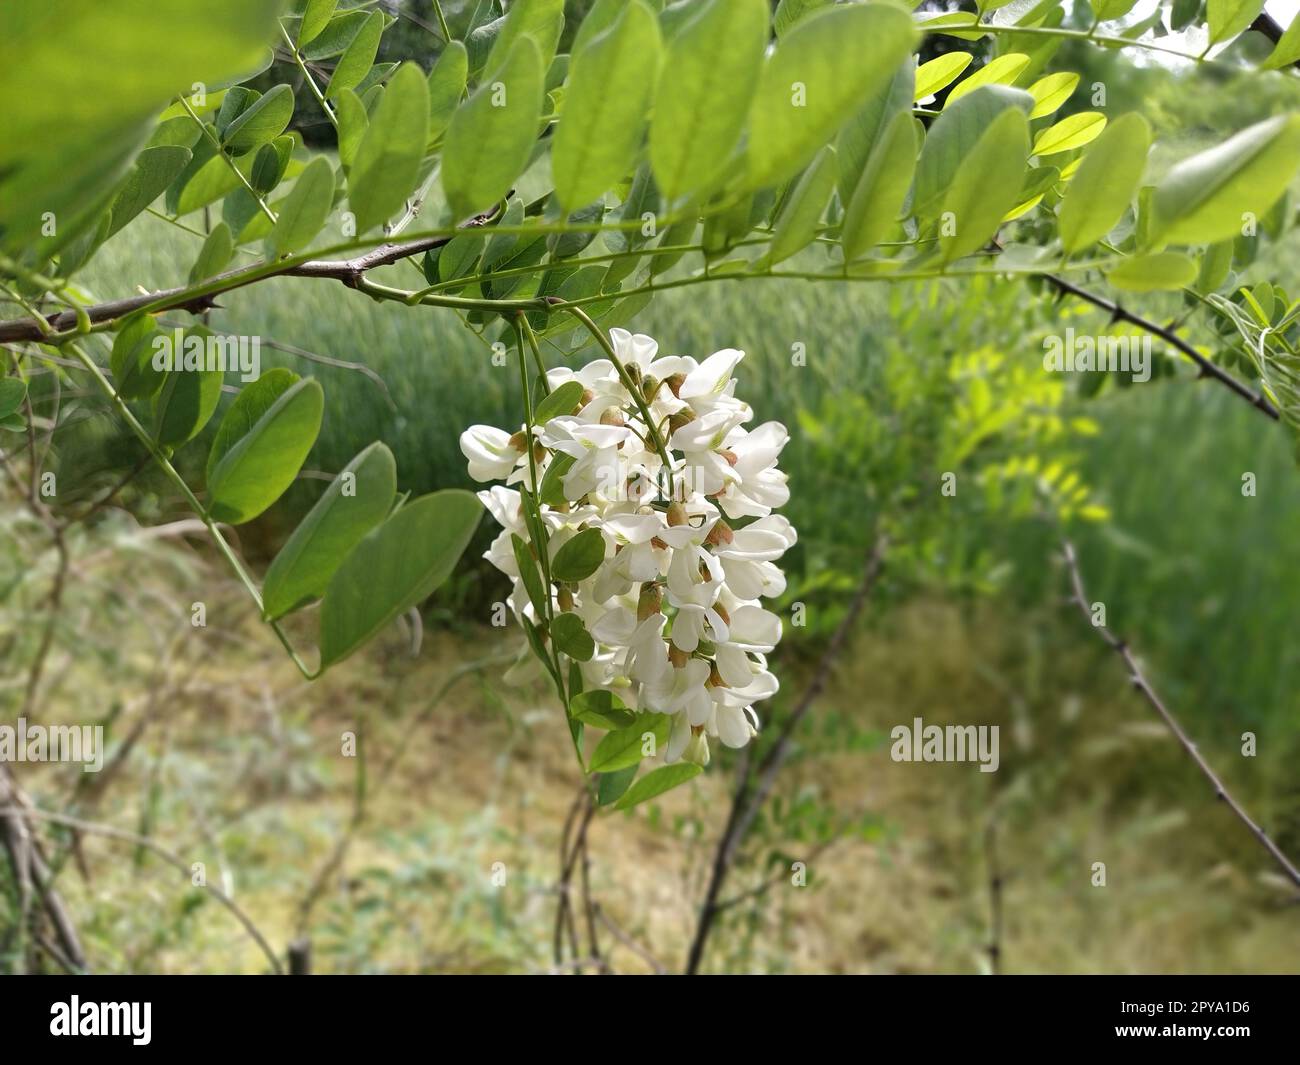 Flowers of White Acacia. Robinia pseudoacacia, commonly known in its native territory as black locust. White fragrant flowers like a good honey plant. Attraction of bees and bumblebees Stock Photo